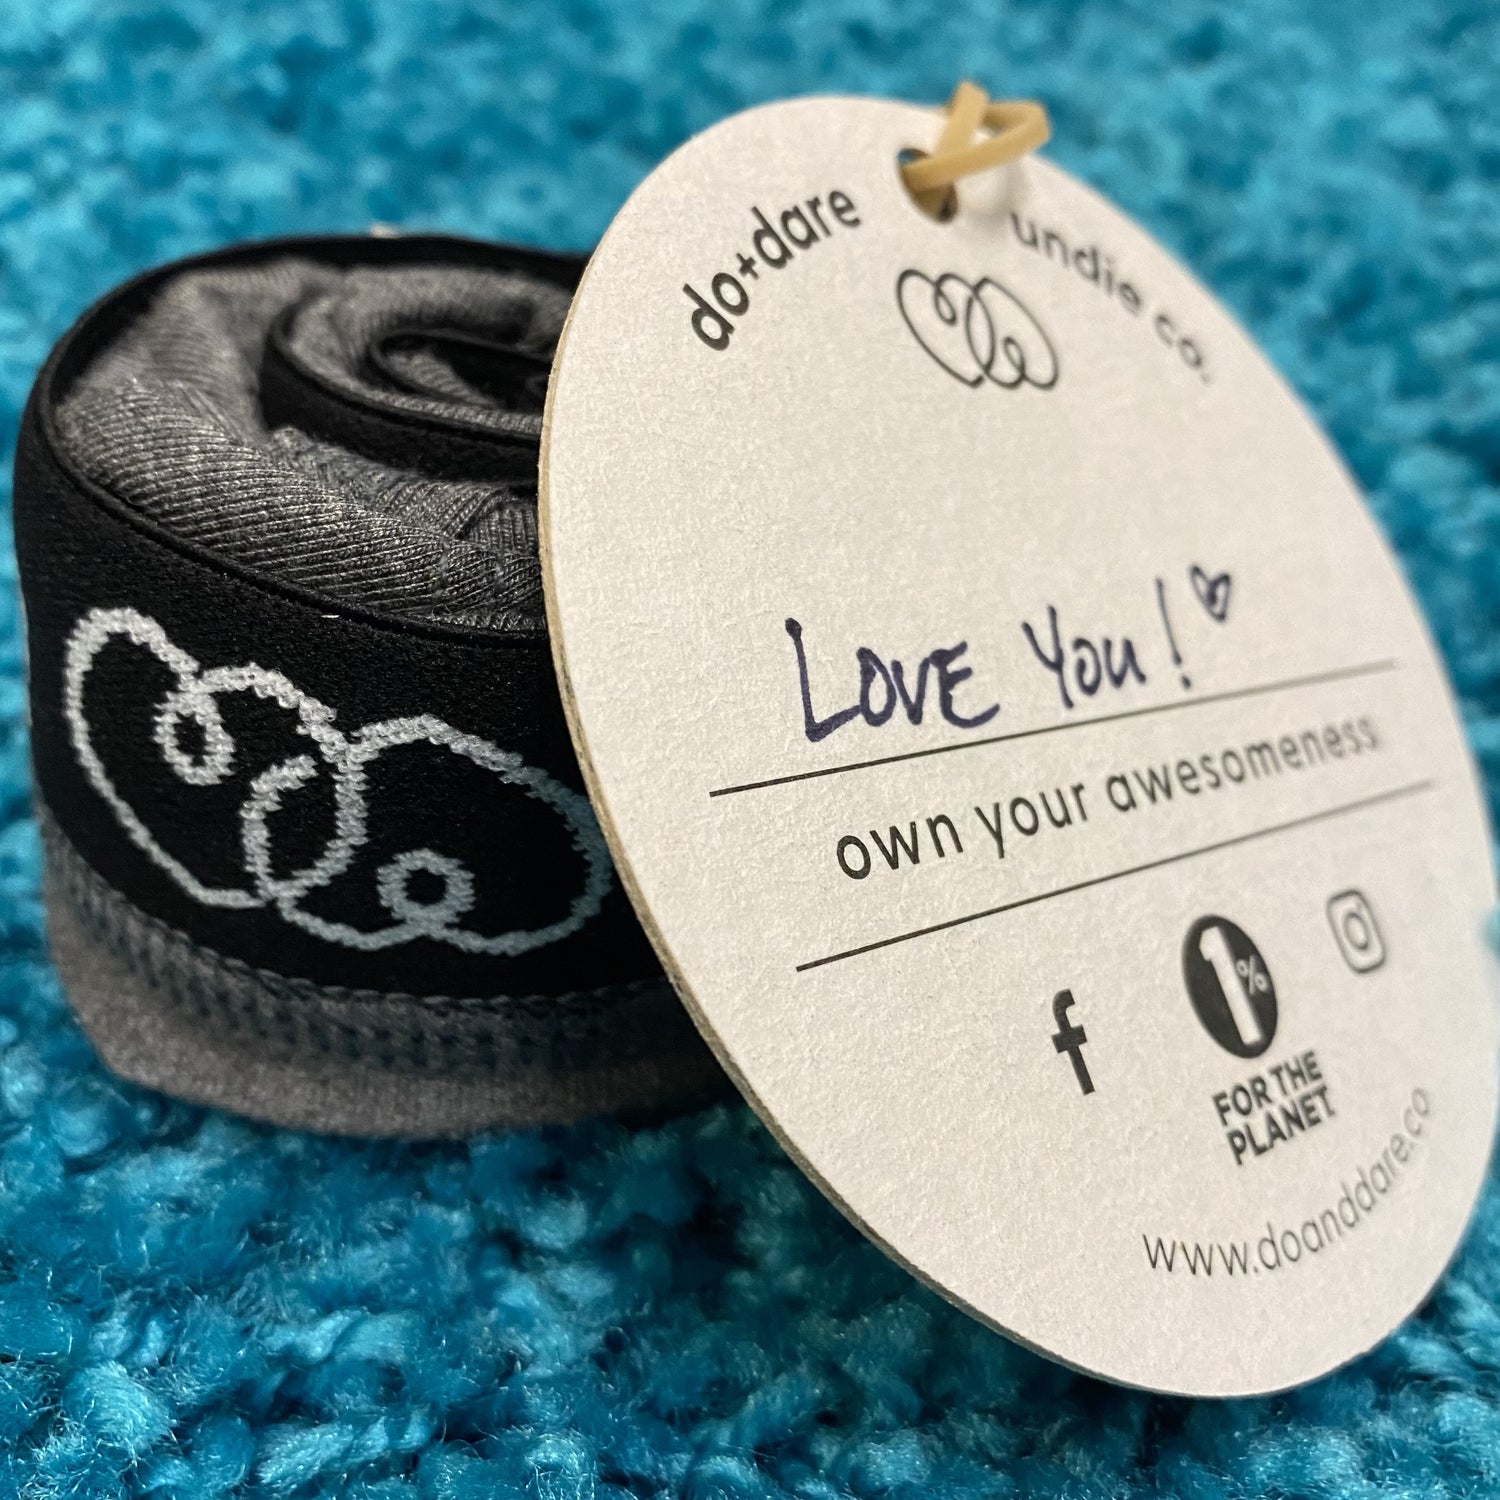 underwear rolled into a puck with a coaster tag - on it is written "love you!" 